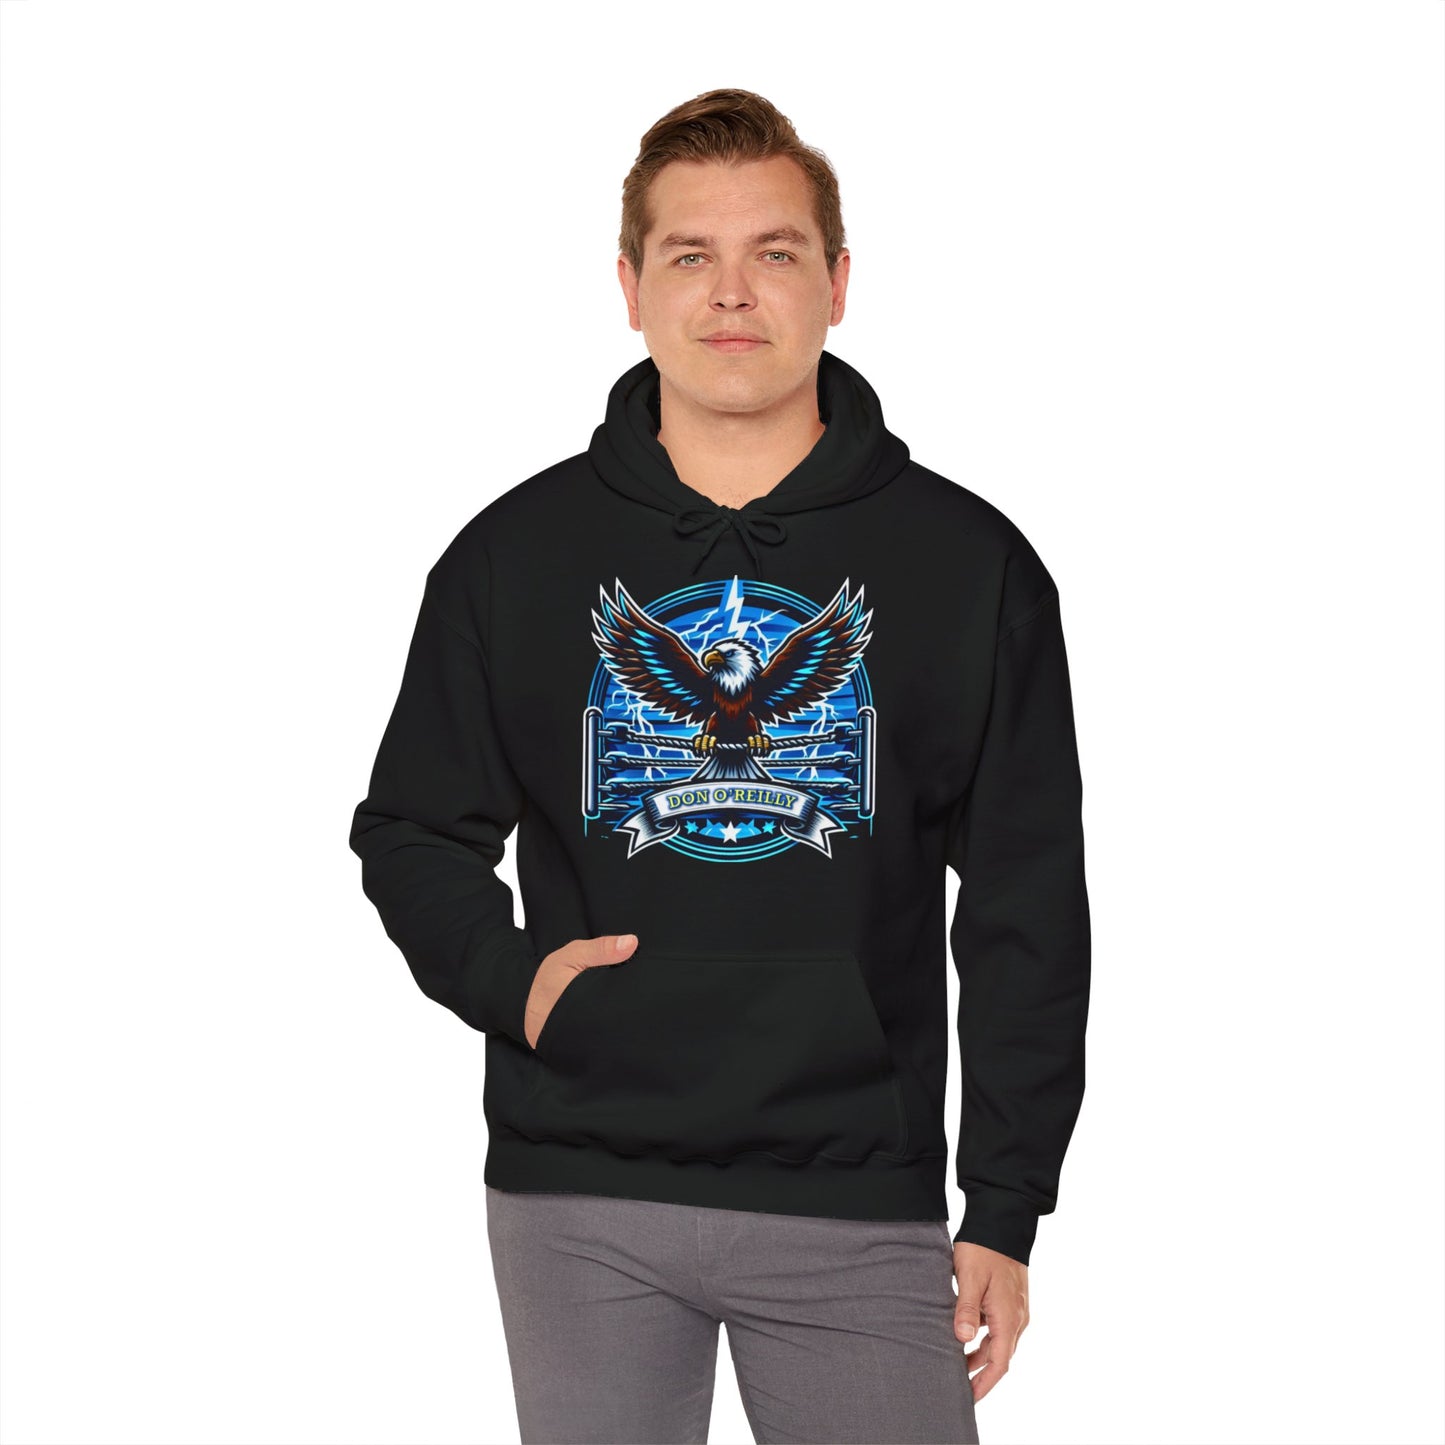 Don O'Reilly - Double Sided Hooded Sweatshirt